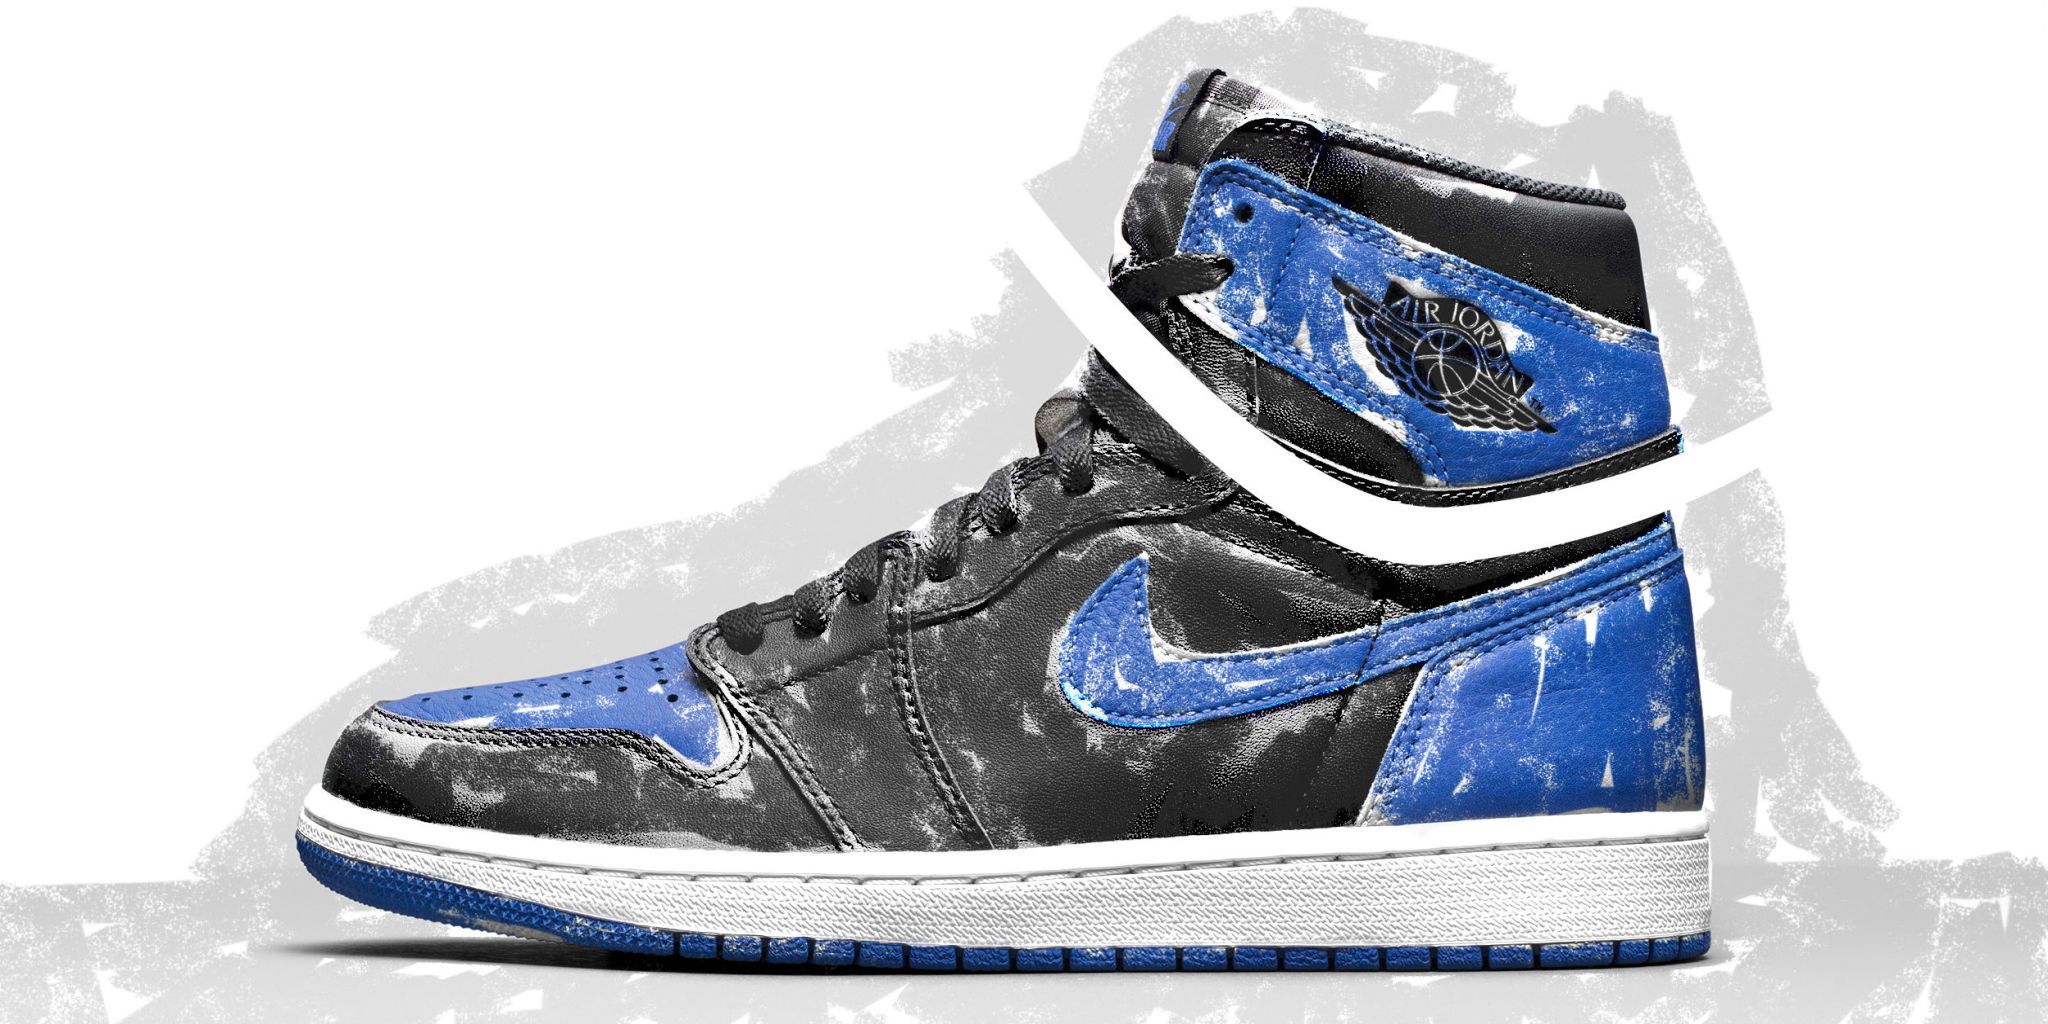 The Rise and Fall of the High-Top Sneaker